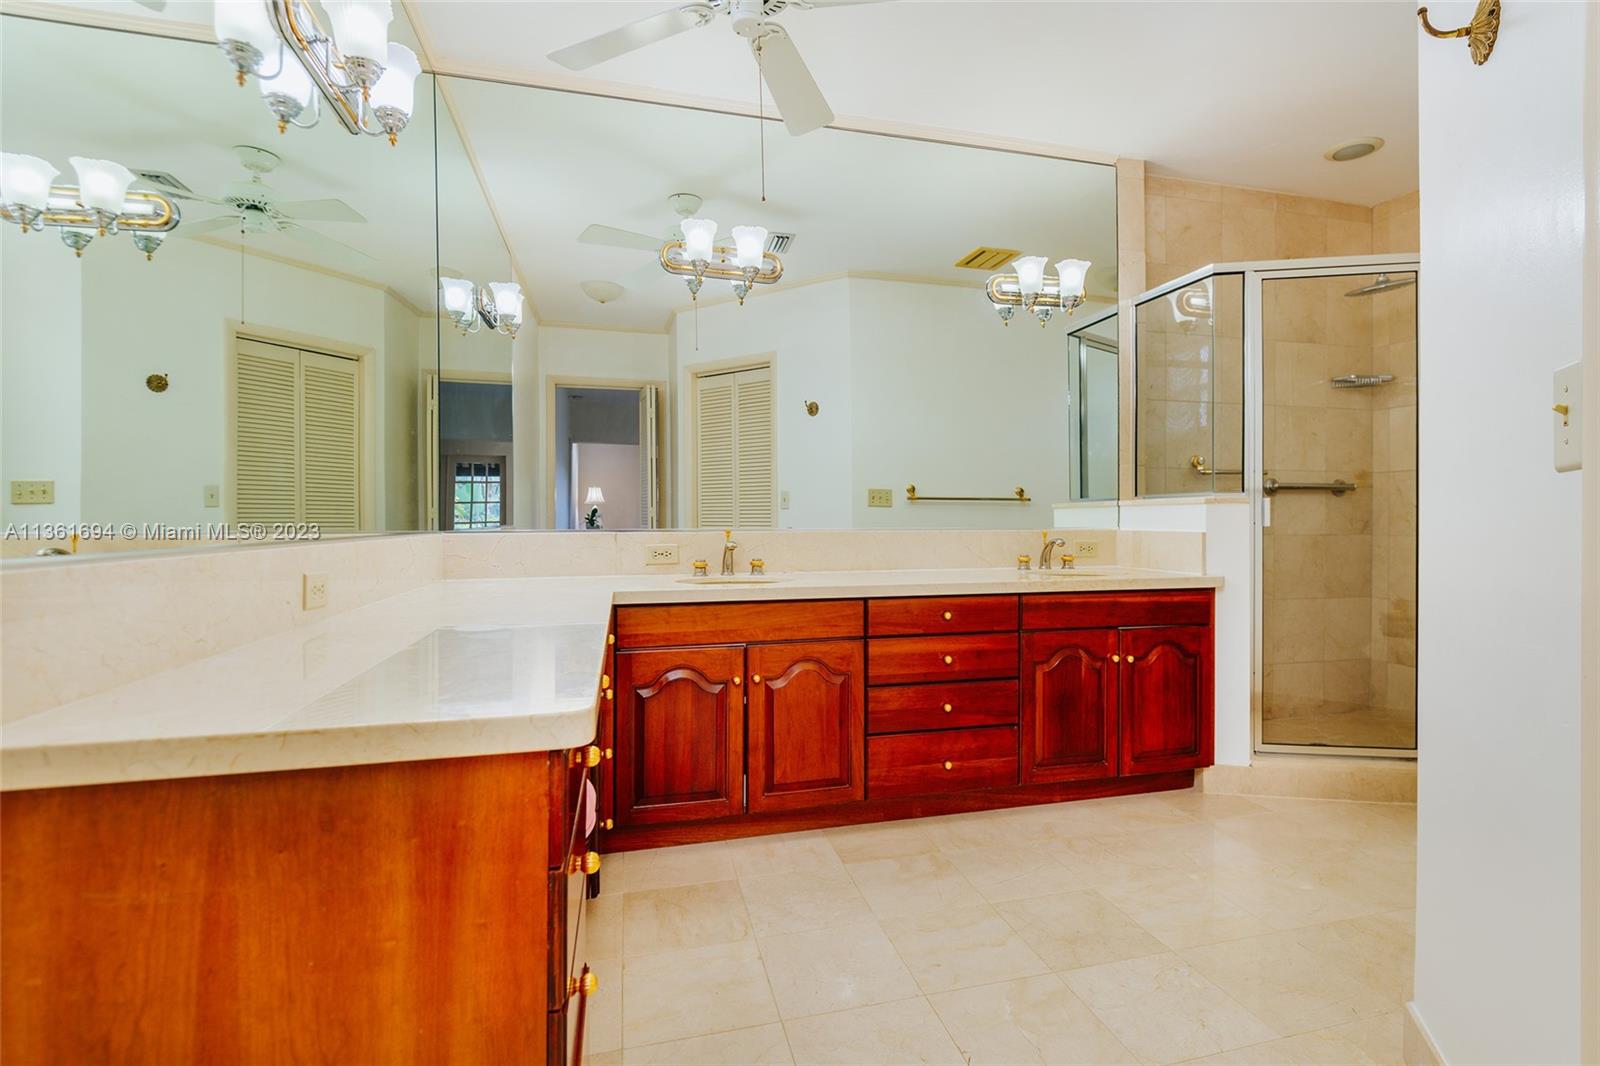 Double sinks with vanity area and shower
